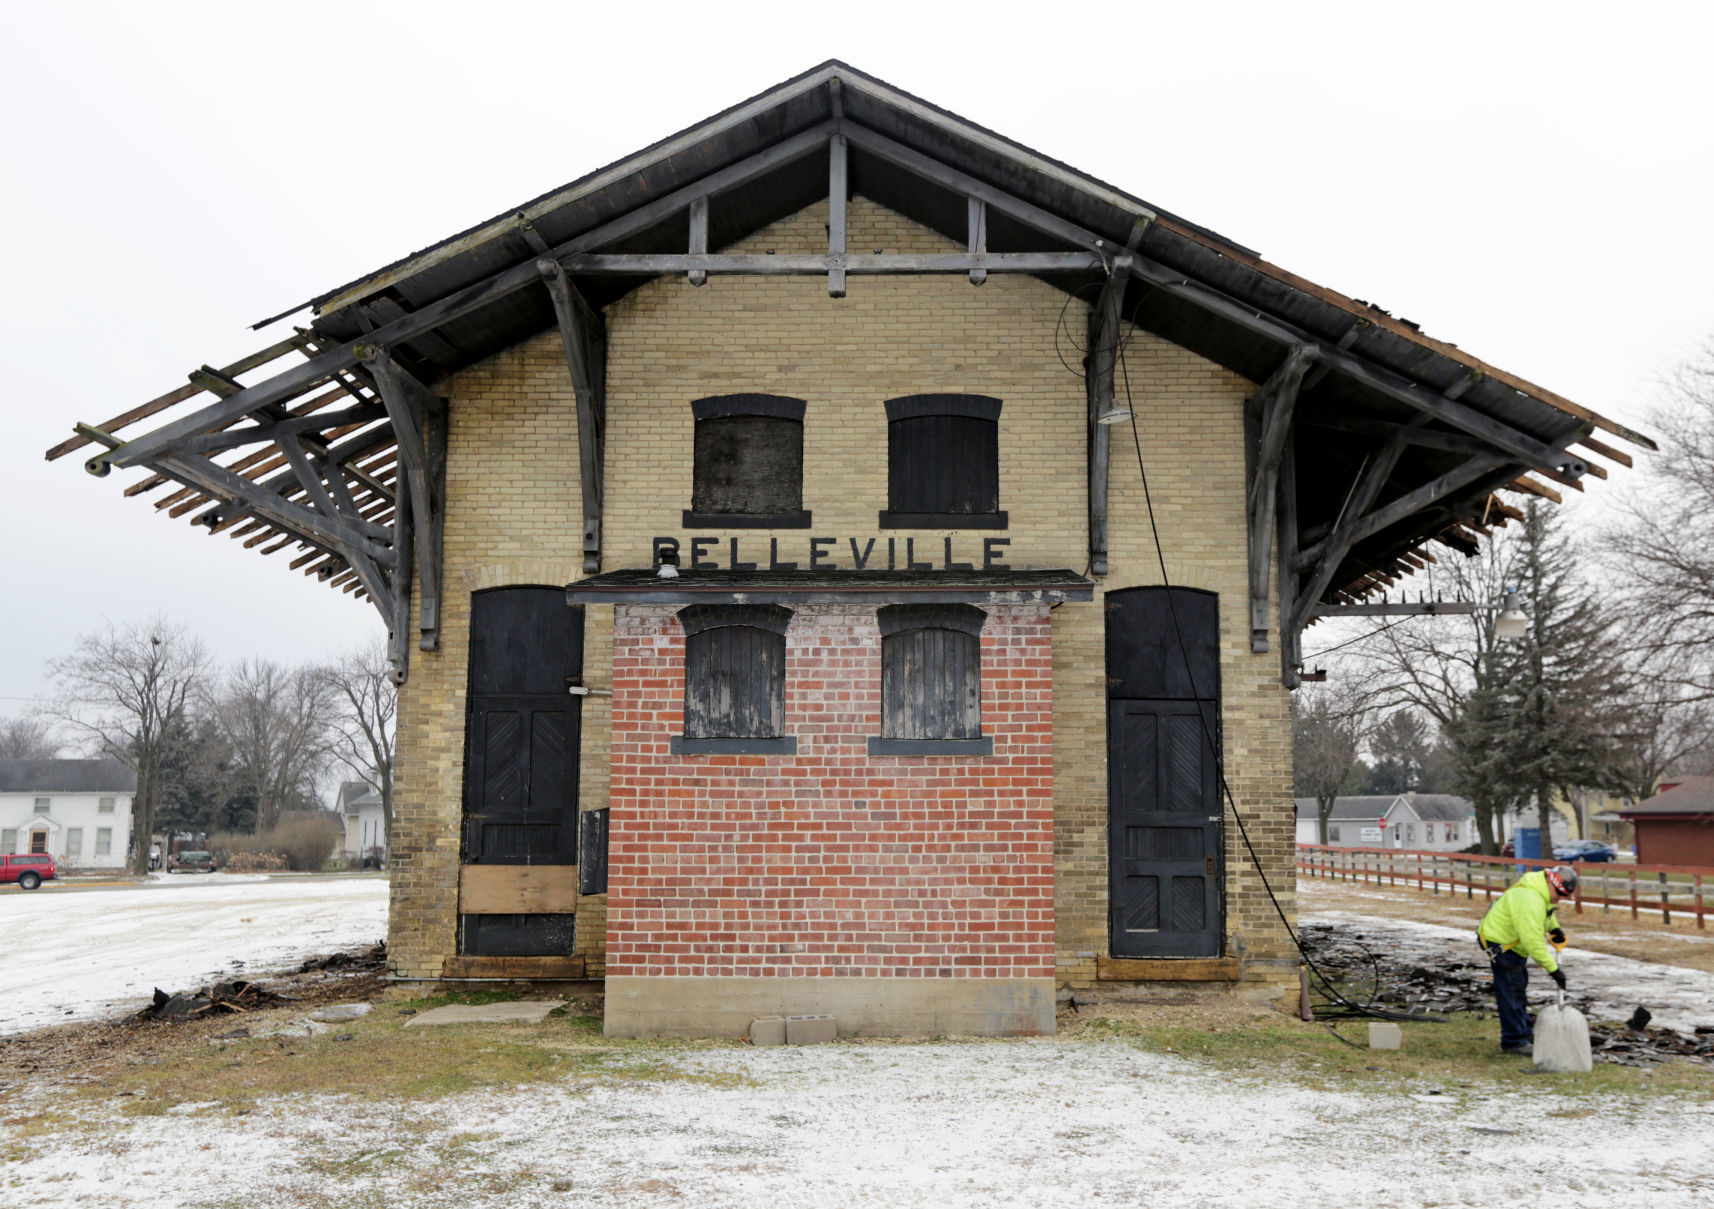 Historic Belleville train depot on its way to new life and photo